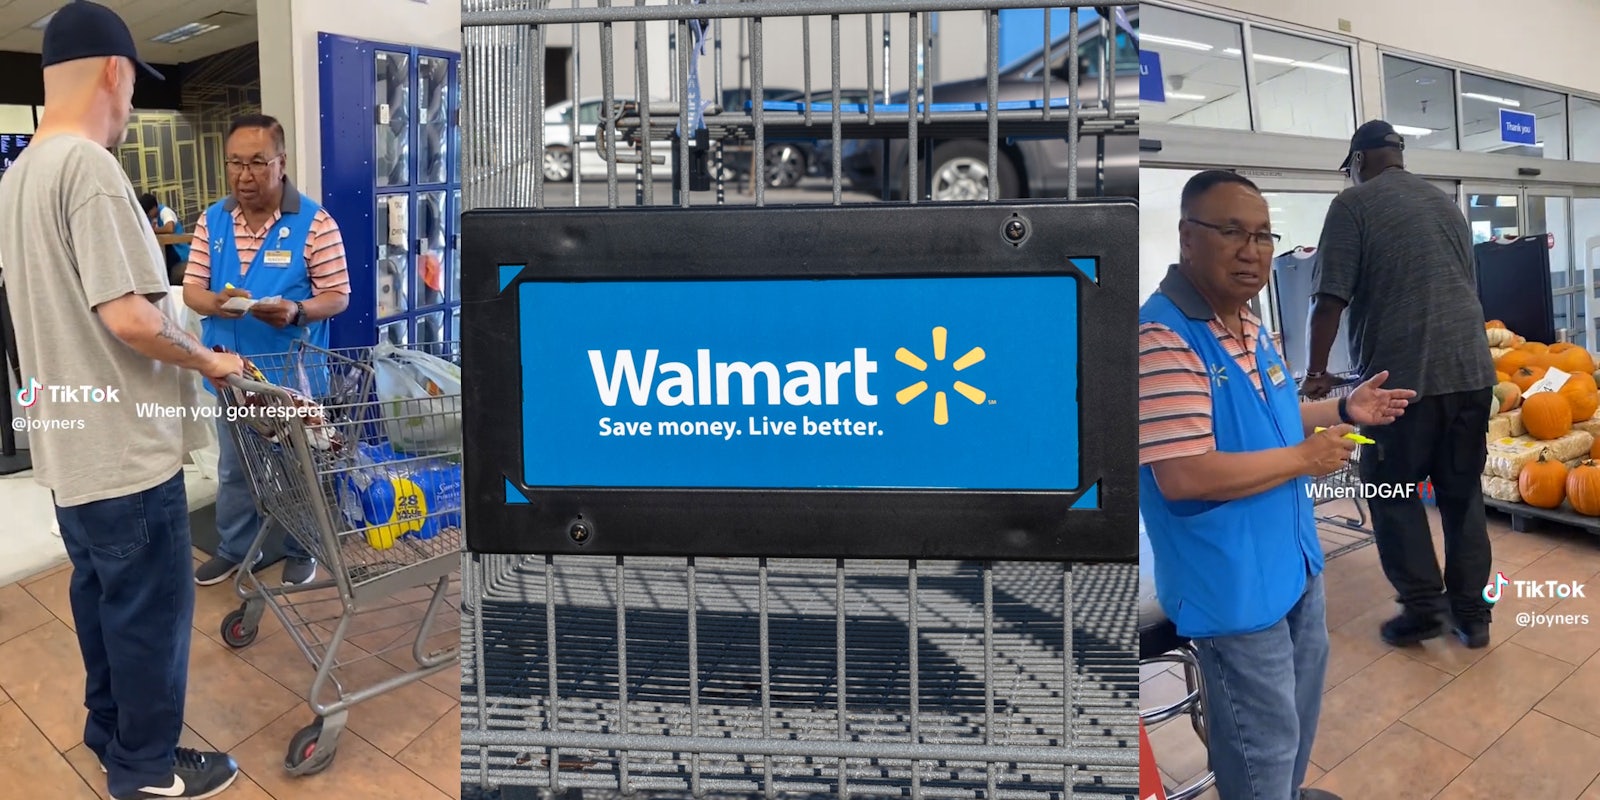 Man checking out at Walmart with guard(r), Walmart brand sign(c), Man ignoring guard while leaving (L)